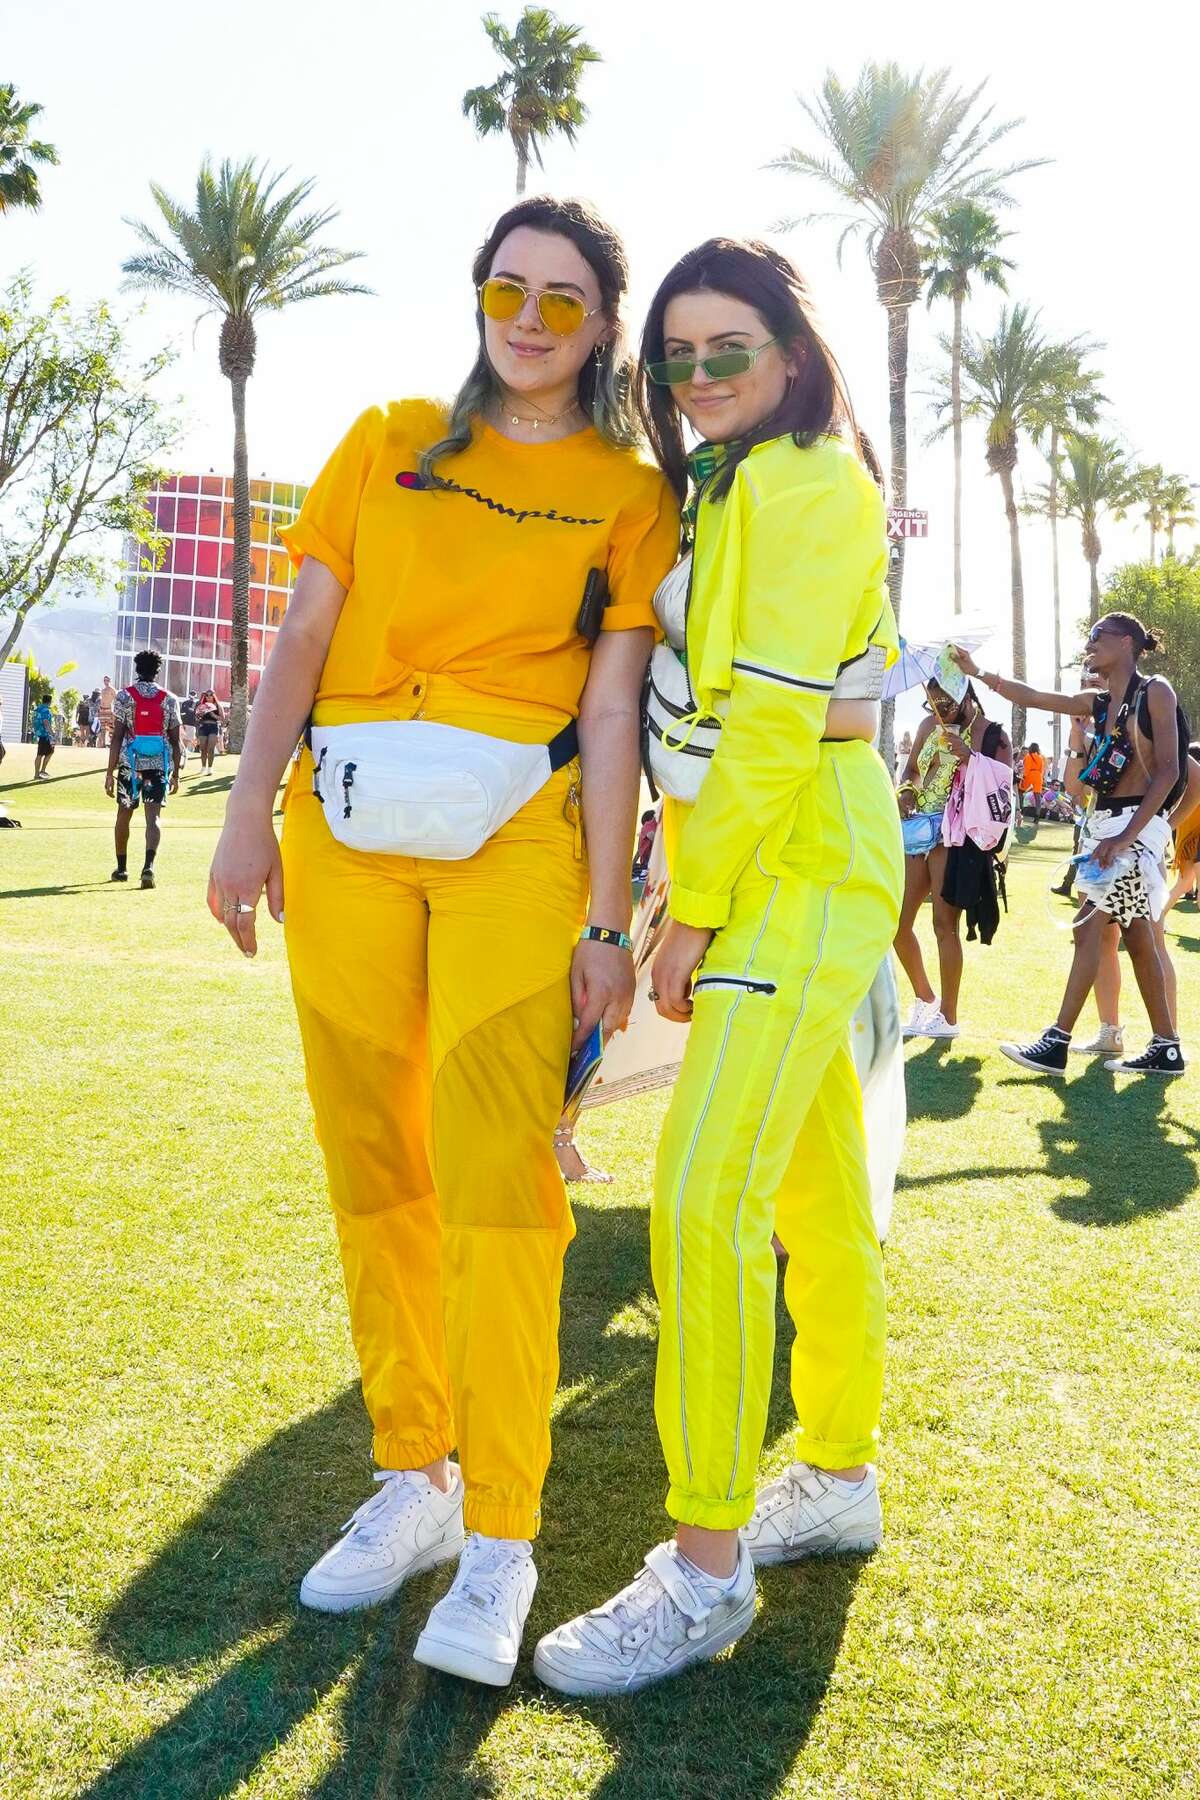 Colorful And Barely There Outfits Still Dominate At Coachella 2019